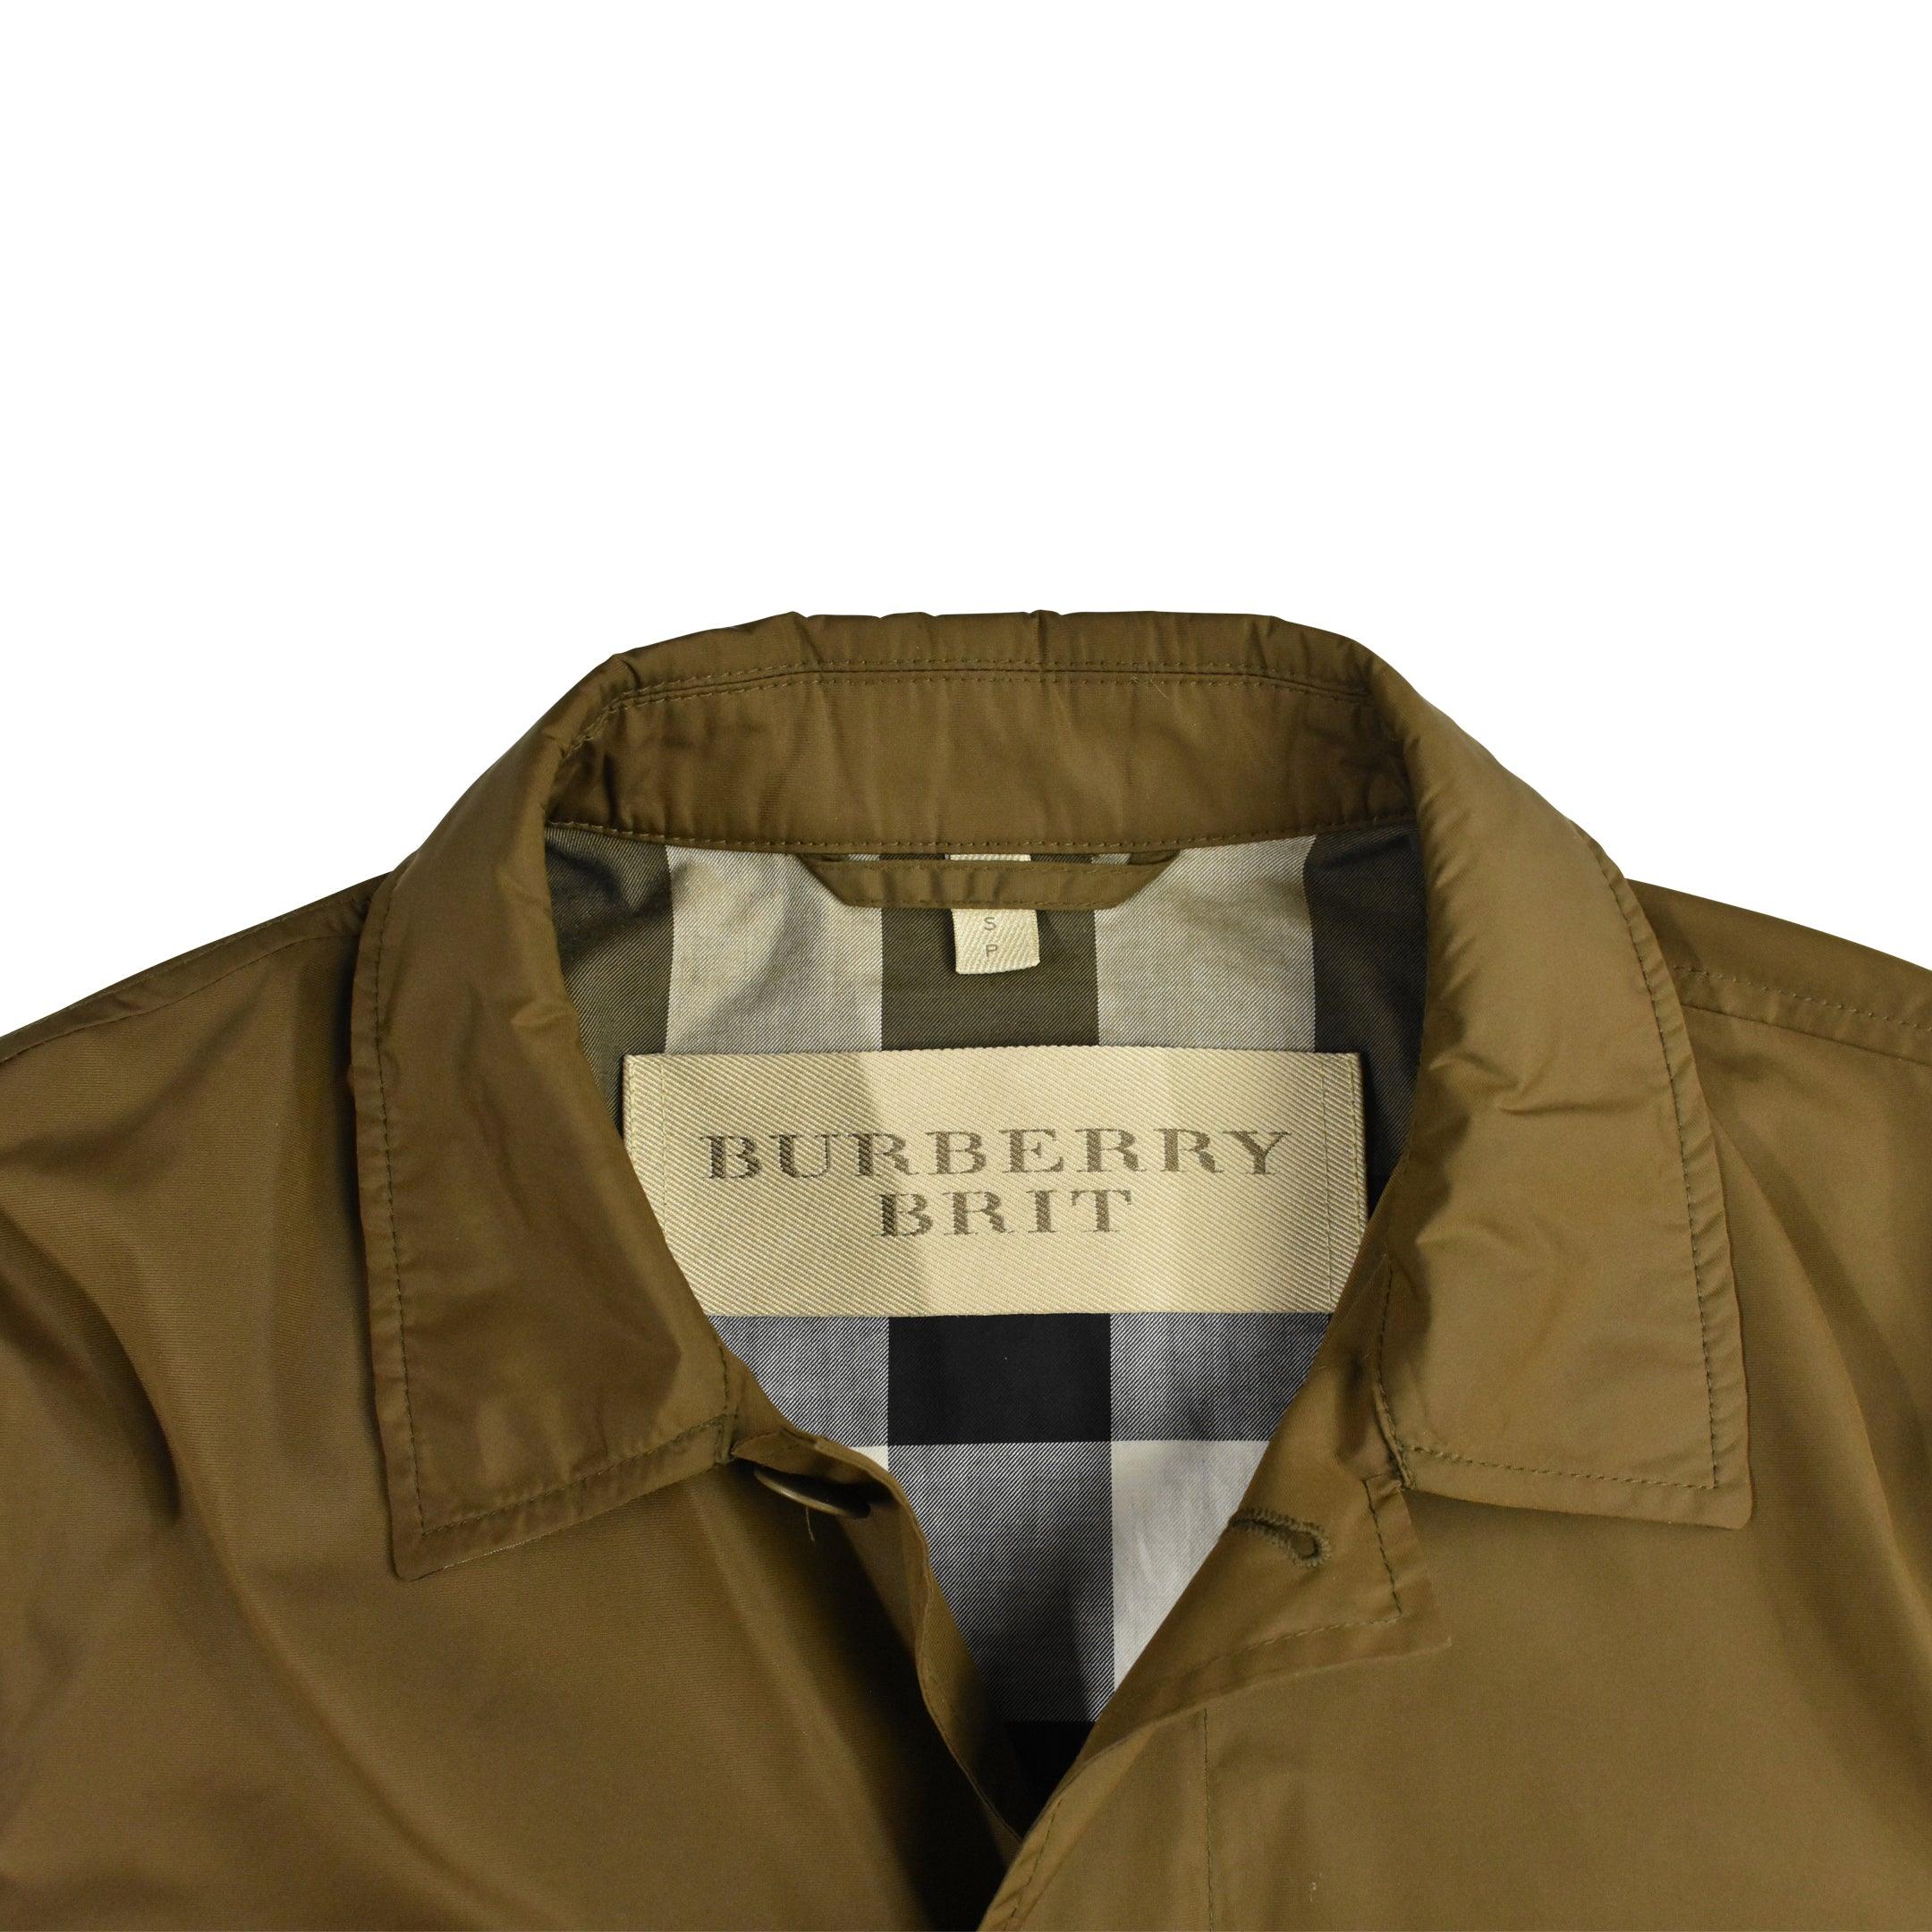 Burberry Brit Jacket - Men's S - Fashionably Yours